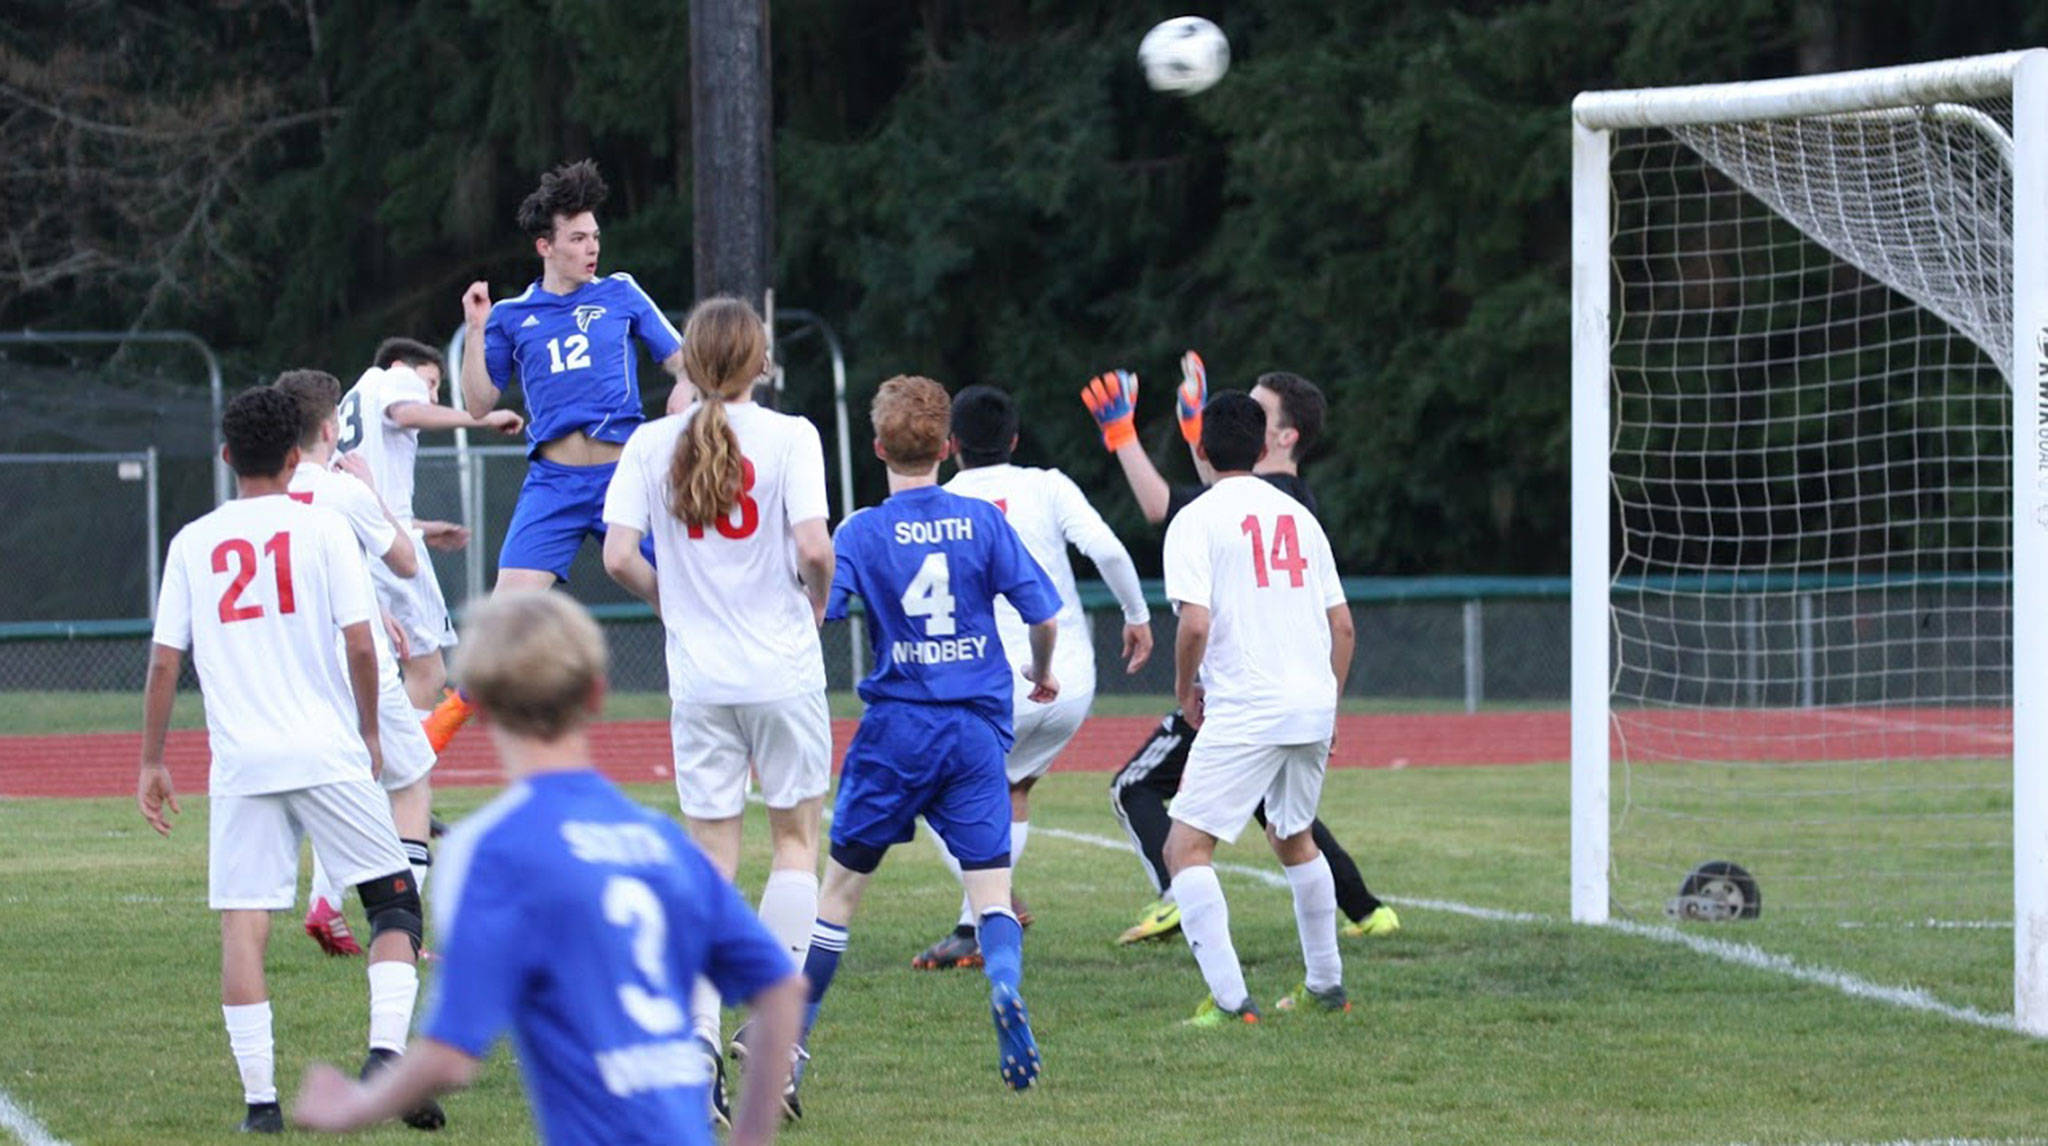 South Whidbey’s Nevin Daniels (12) drives a header toward the goal in Friday’s match with Coupeville. (Photo by Matt Simms)